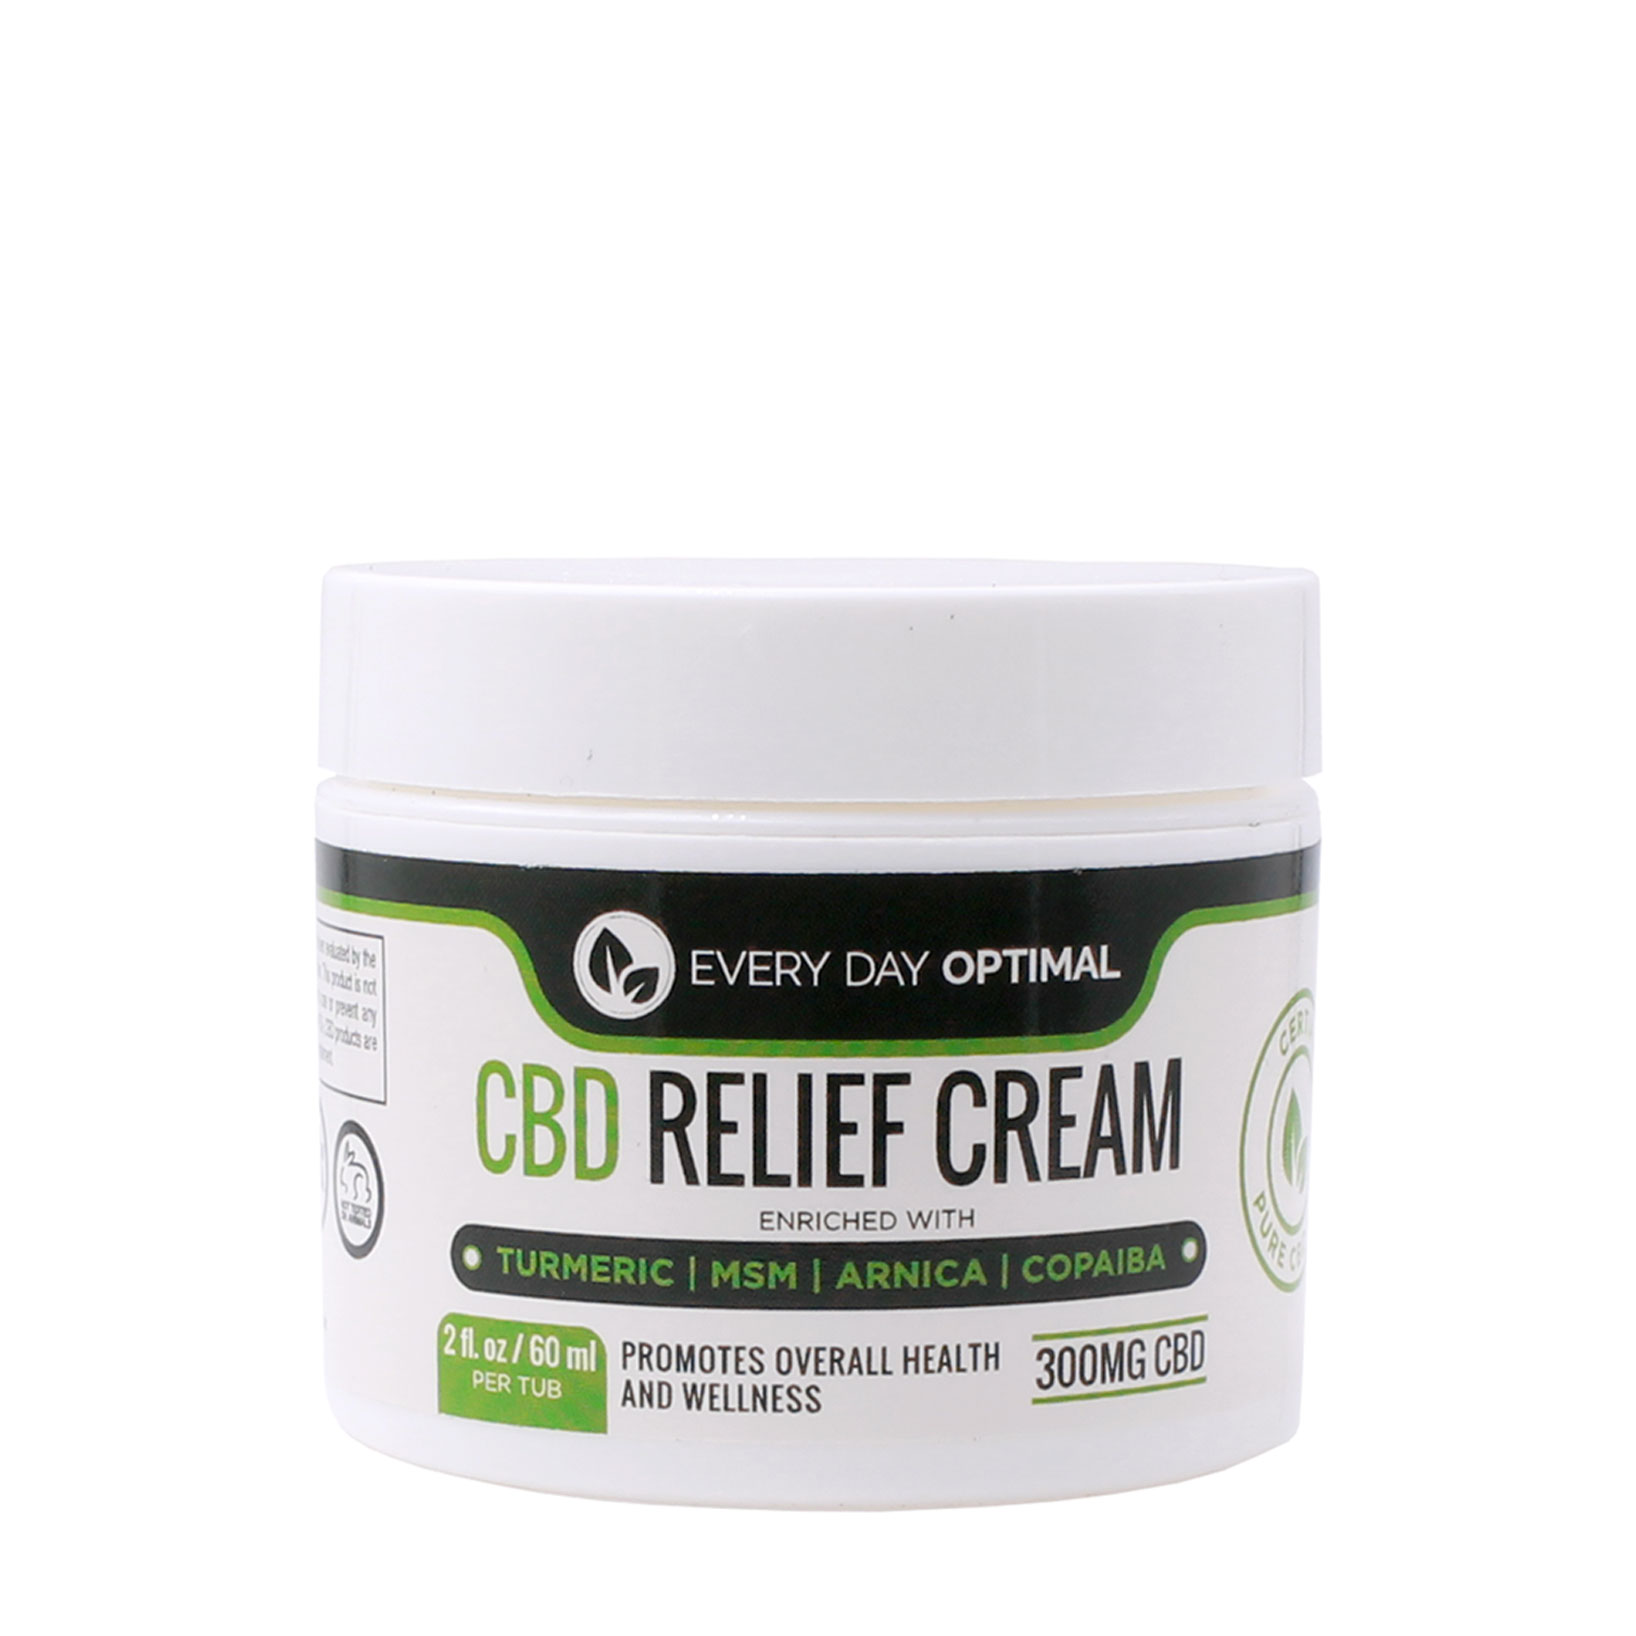 PAIN RELIEF CBD AND THC CREAM - Cbd|Pain|Cream|Products|Relief|Creams|Hemp|Product|Skin|Oil|Arthritis|Ingredients|Body|Topicals|Muscle|Effects|Inflammation|Brand|People|Spectrum|Health|Oils|Salve|Thc|Quality|Benefits|Menthol|Way|Joints|Aches|Research|Potency|Results|Creams|Plant|Cannabinoids|Brands|Naturals|Cons|Muscles|Cbd Cream|Cbd Creams|Pain Relief|Cbd Products|Cbd Topicals|Cbd Oil|Fab Cbd|Joint Pain|Full Spectrum Cbd|Cbd Pain Cream|Chronic Pain|United States|Cbd Oils|Topical Products|Rheumatoid Arthritis|Topical Cbd Cream|Endocannabinoid System|Pain Relief Cream|Green Roads|Pain Management|Full-Spectrum Cbd|Joy Organics|Cbd Pain Relief|Topical Cream|Topical Cbd Products|Essential Oils|Cheef Botanicals|Cbd Isolate|Side Effects|Cbd Costs